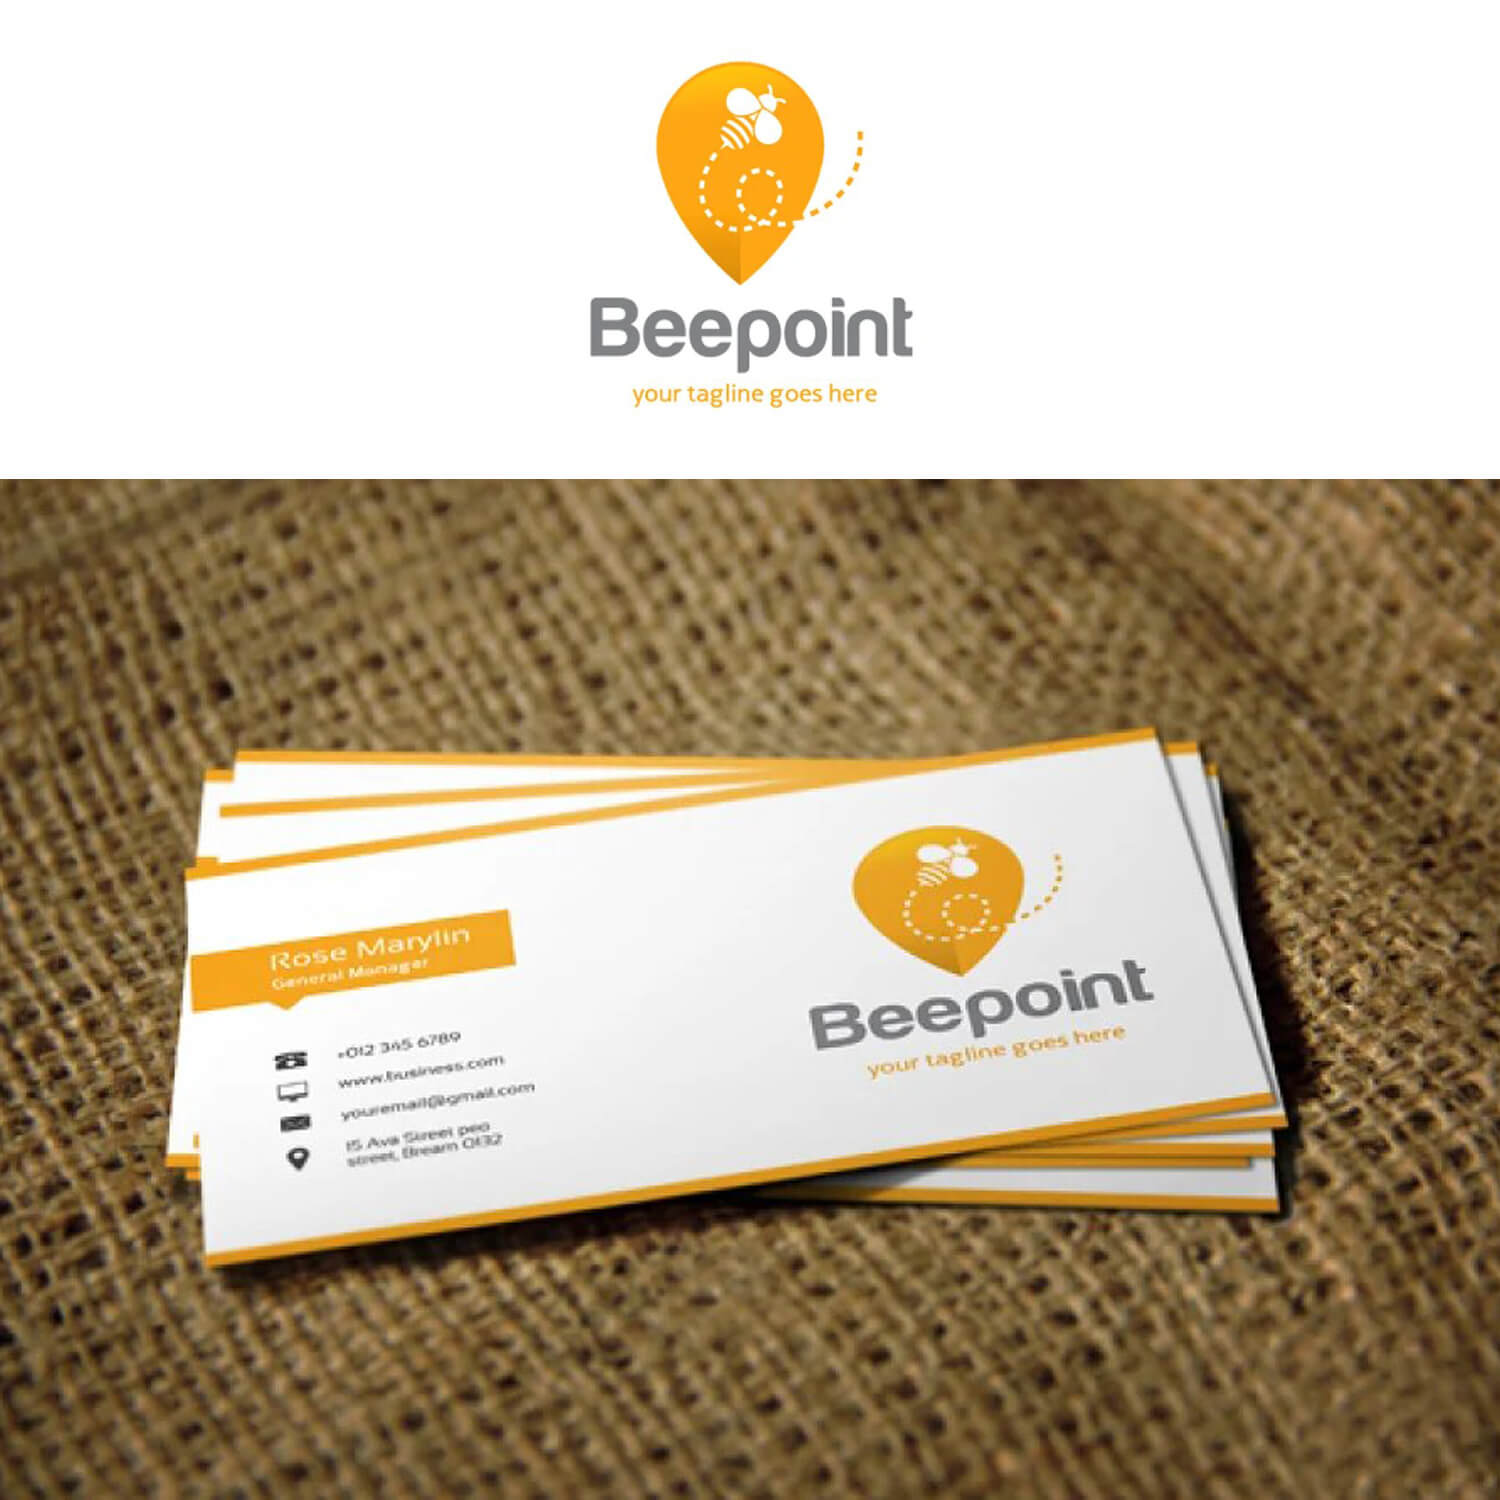 Business card of the general manager of Beepoint company.